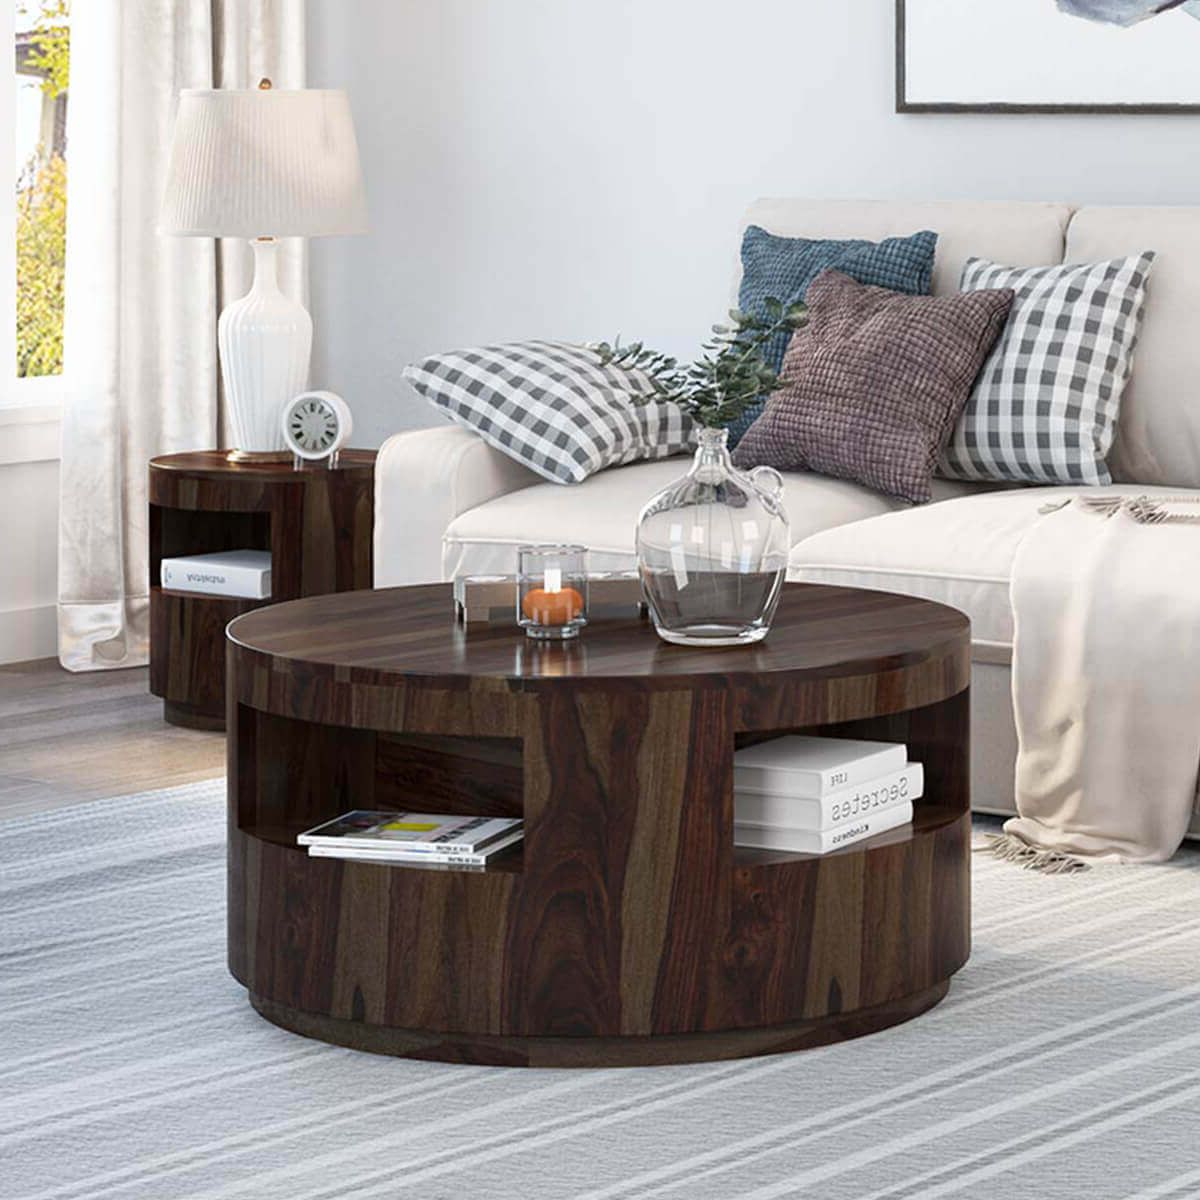 Trendy Wood Coffee Tables Throughout Ladonia Rustic Solid Wood Round Coffee Table With Shelves (View 7 of 20)